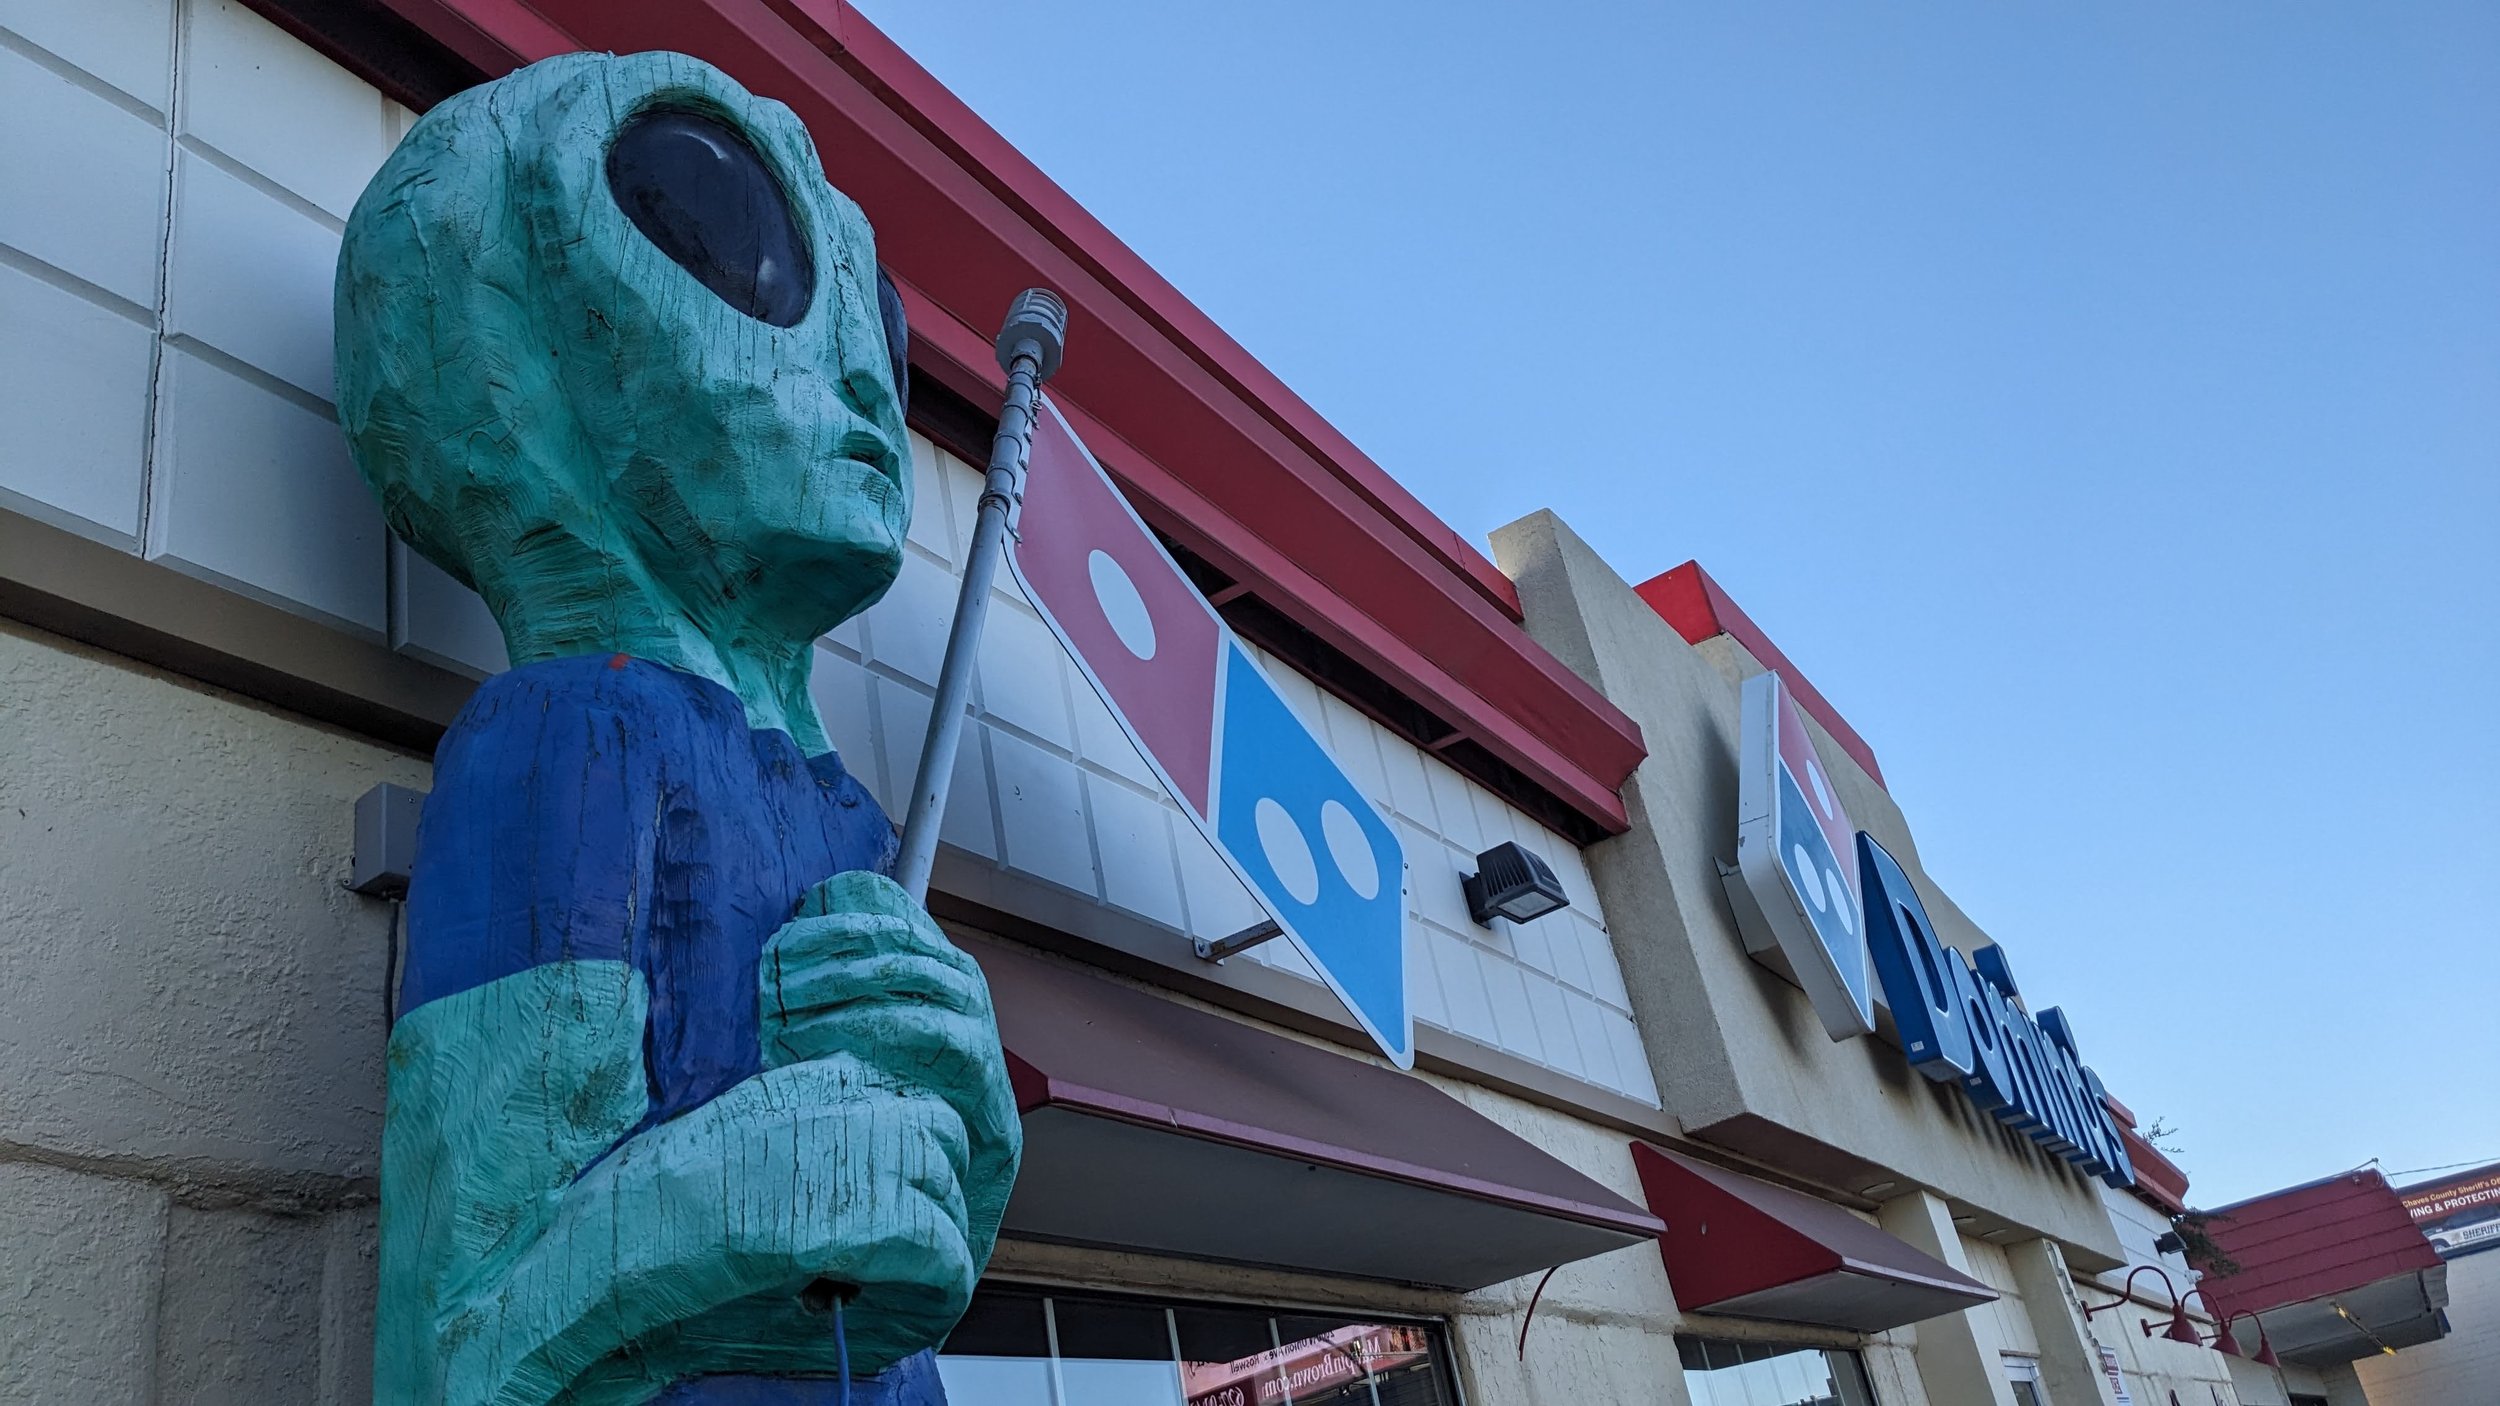 Alien Dominoes Pizza in Roswell New Mexico